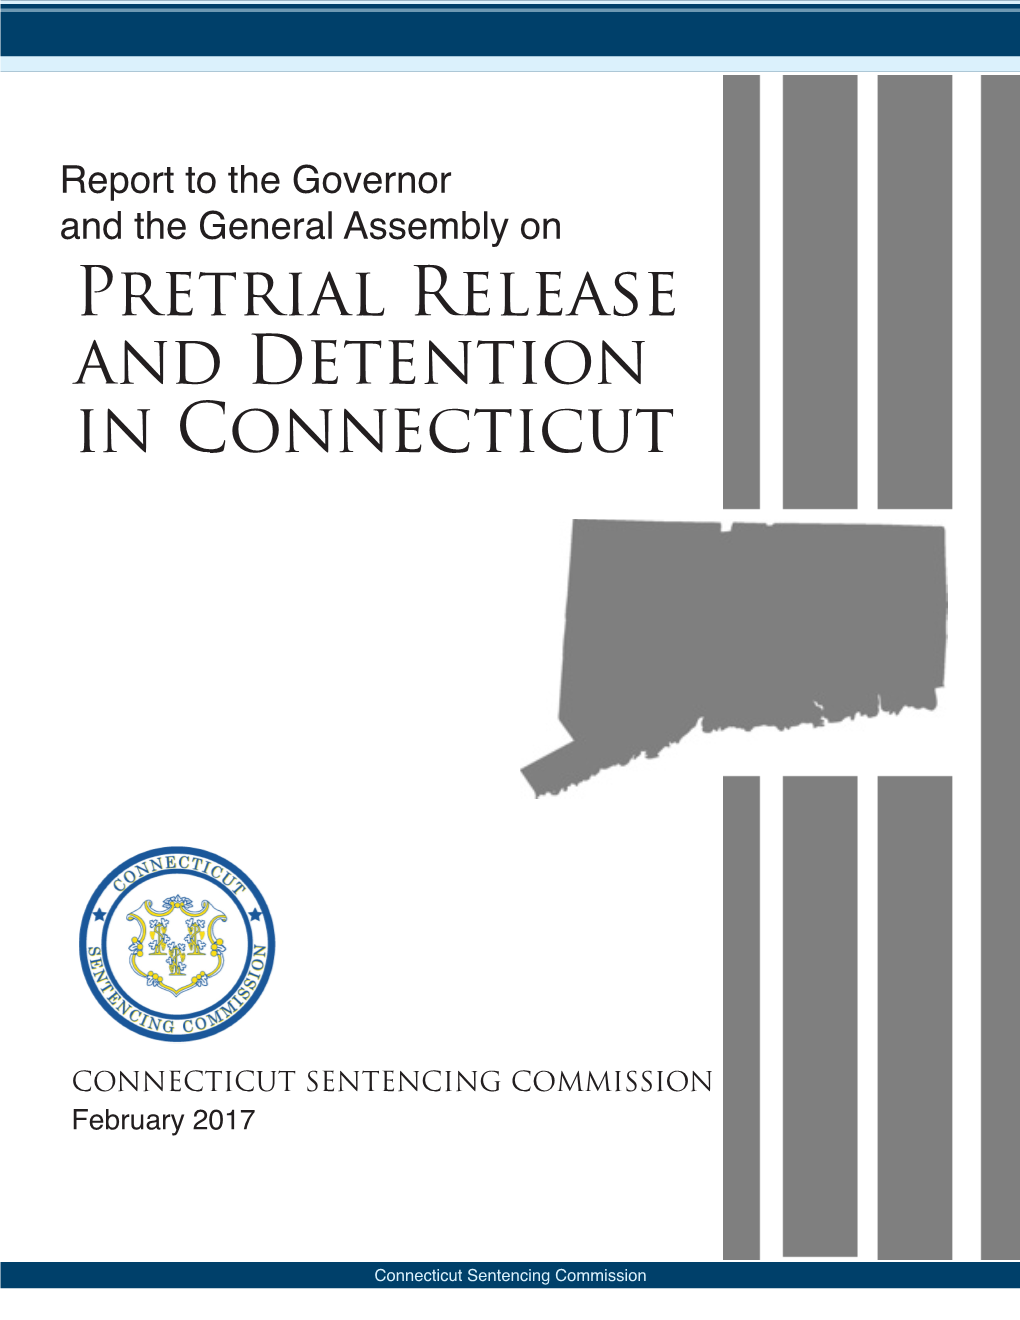 Pretrial Release and Detention in Connecticut